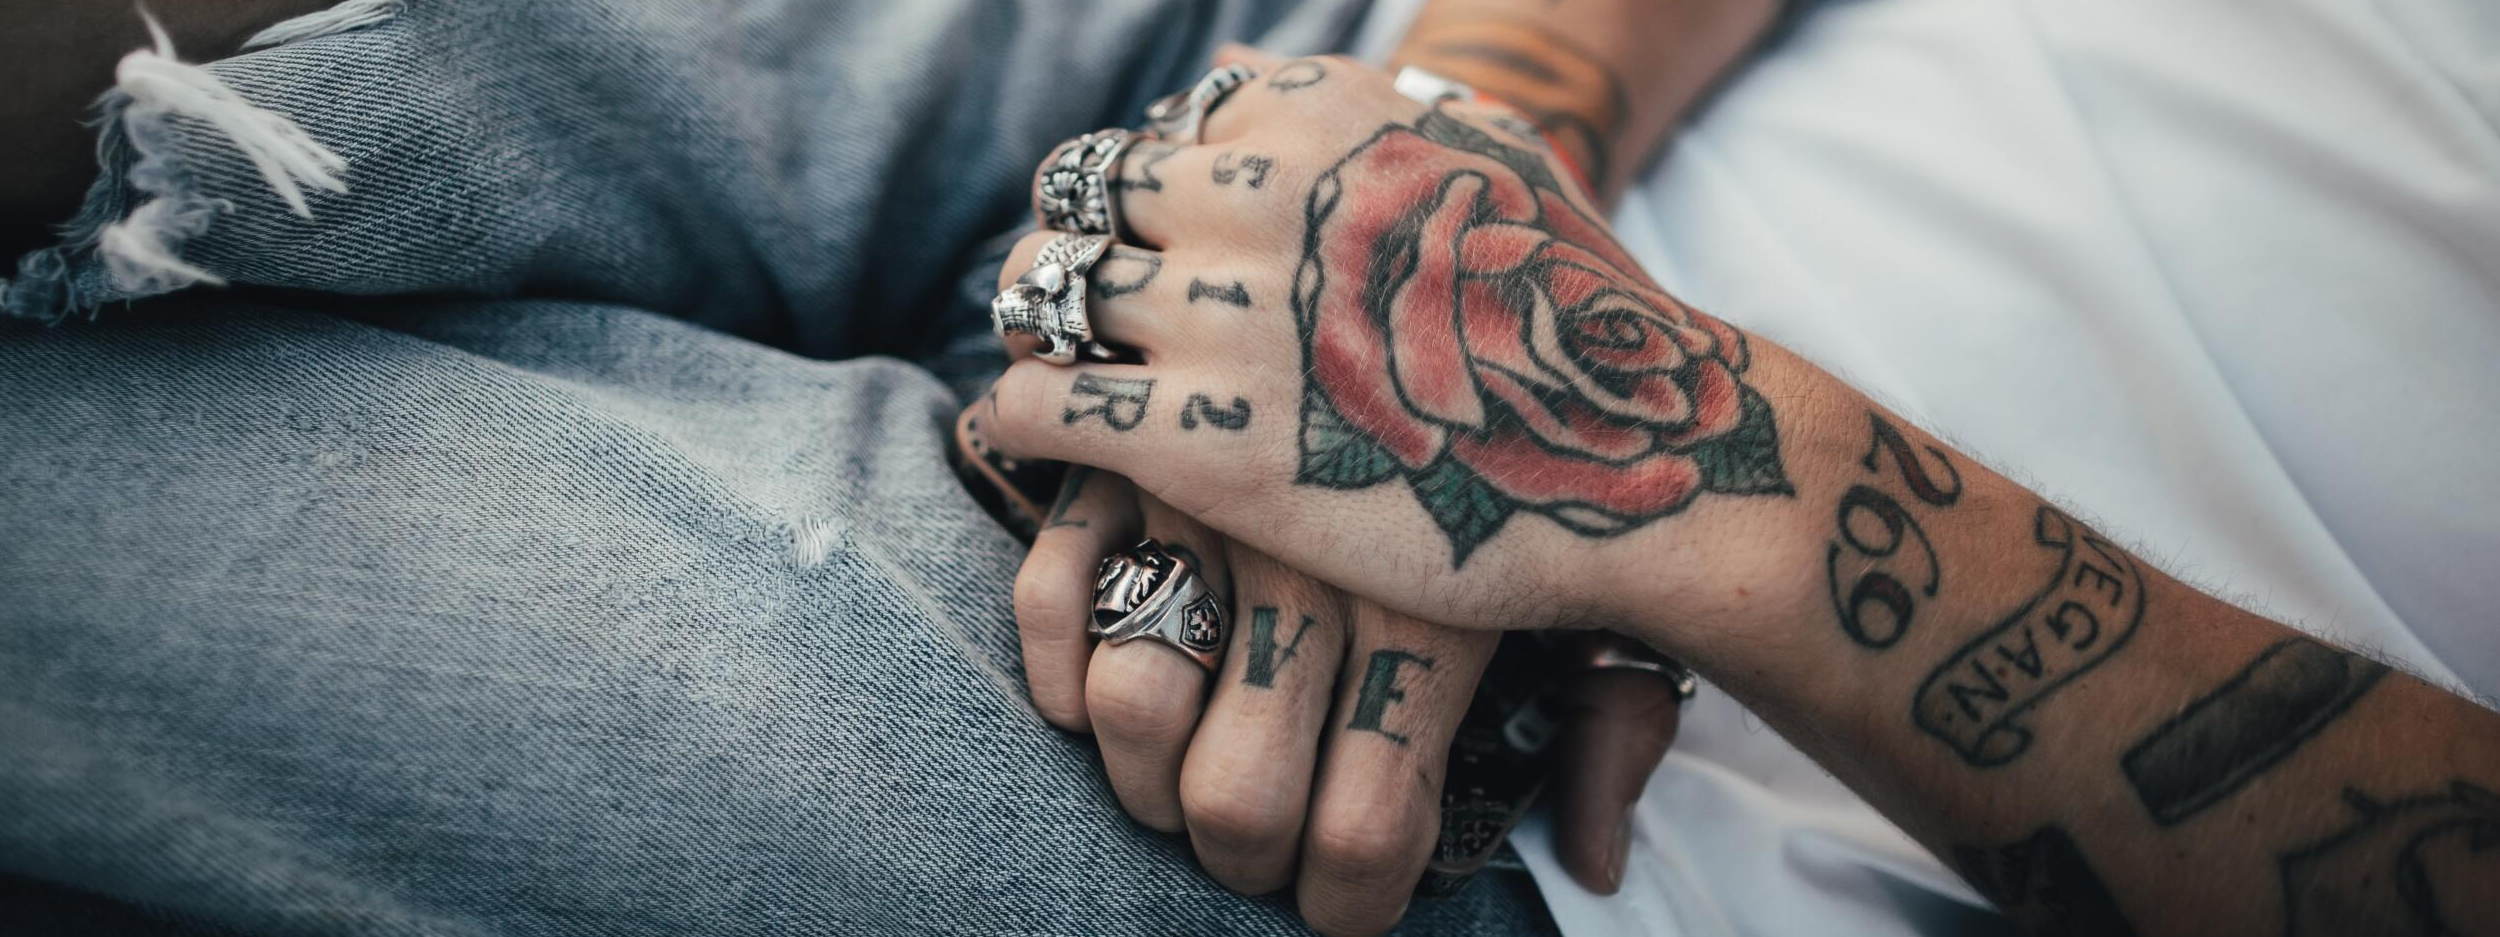 Hand tattoos in black and grey realism by Alo Loco London UK  Rose and  Skull Hands